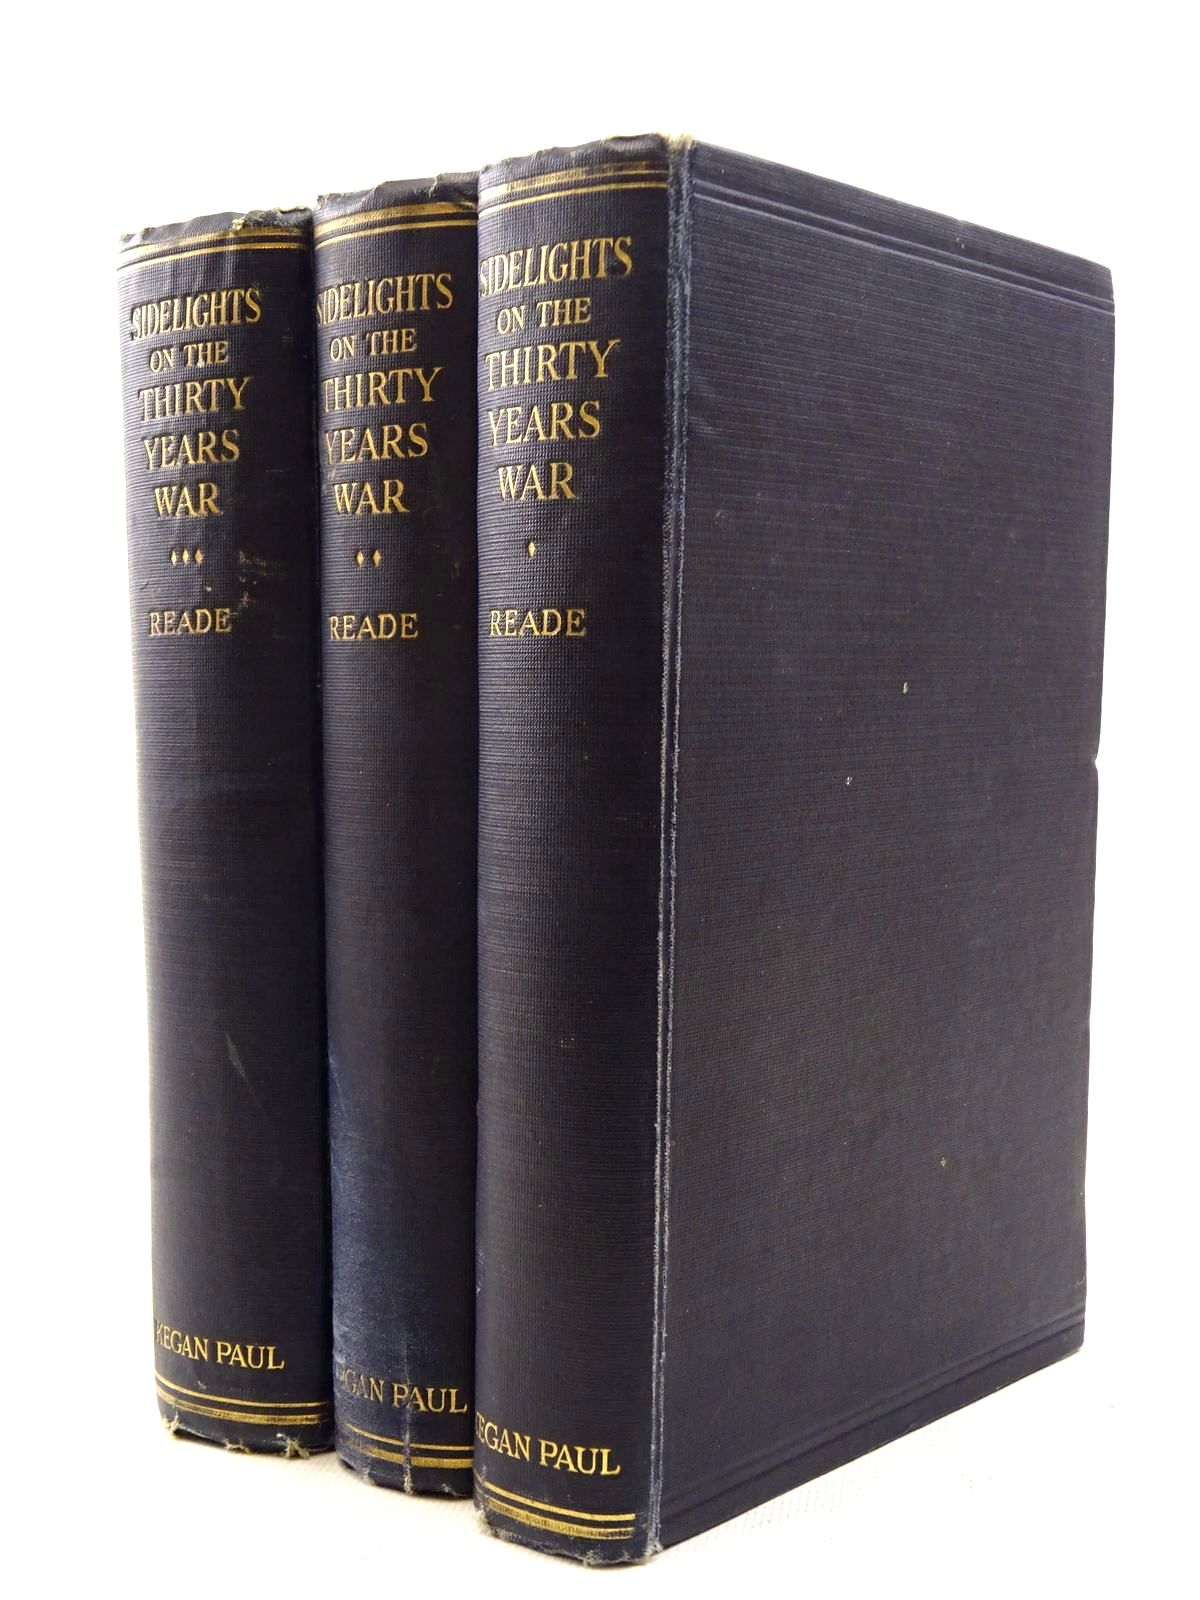 Photo of SIDELIGHTS ON THE THIRTY YEARS WARM (3 VOLUMES) written by Reade, Hubert G.R. published by Kegan Paul, Trench, Trubner &amp; Co. Ltd. (STOCK CODE: 2126071)  for sale by Stella & Rose's Books